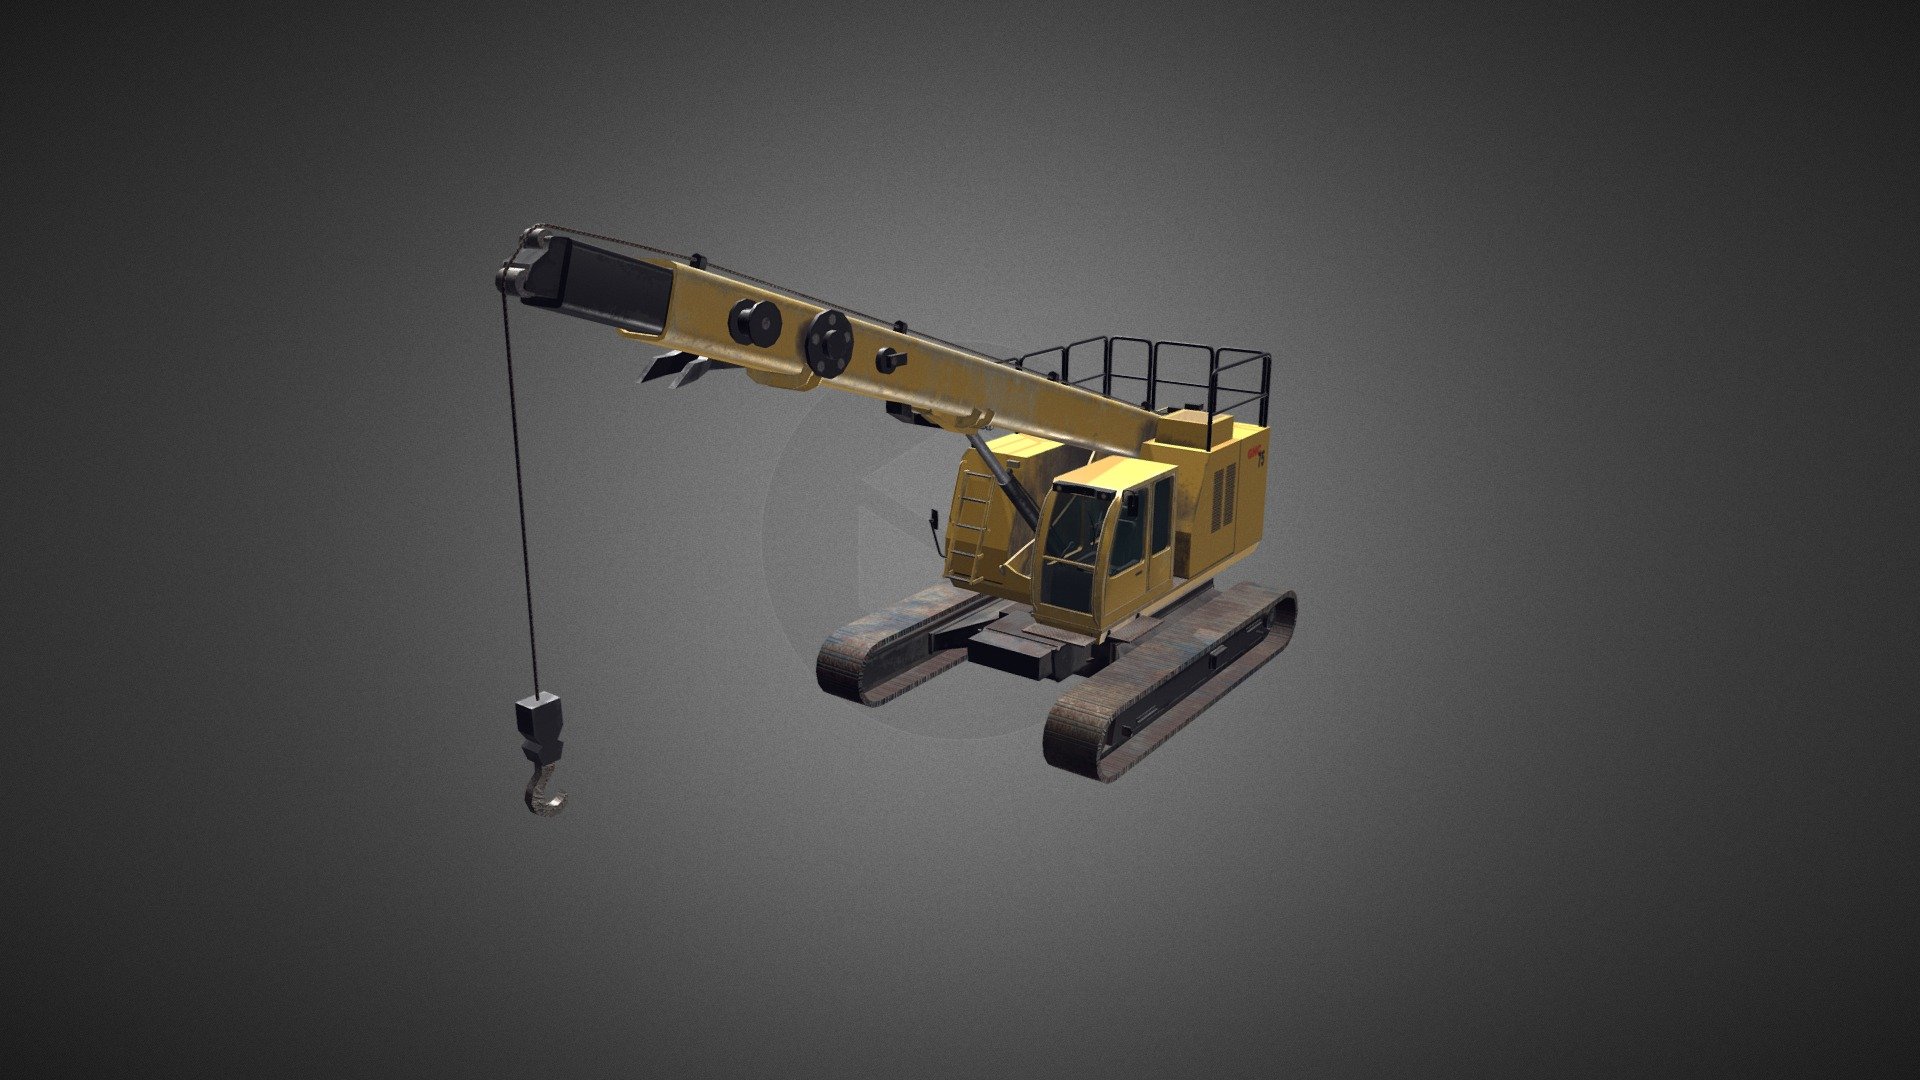 Low poly game-ready 3d model of a Crawler crane 01 for Virtual Reality (VR), Augmented Reality (AR), games and other real-time apps - Crawler crane 01 - Buy Royalty Free 3D model by CG Duck (@cg_duck) 3d model